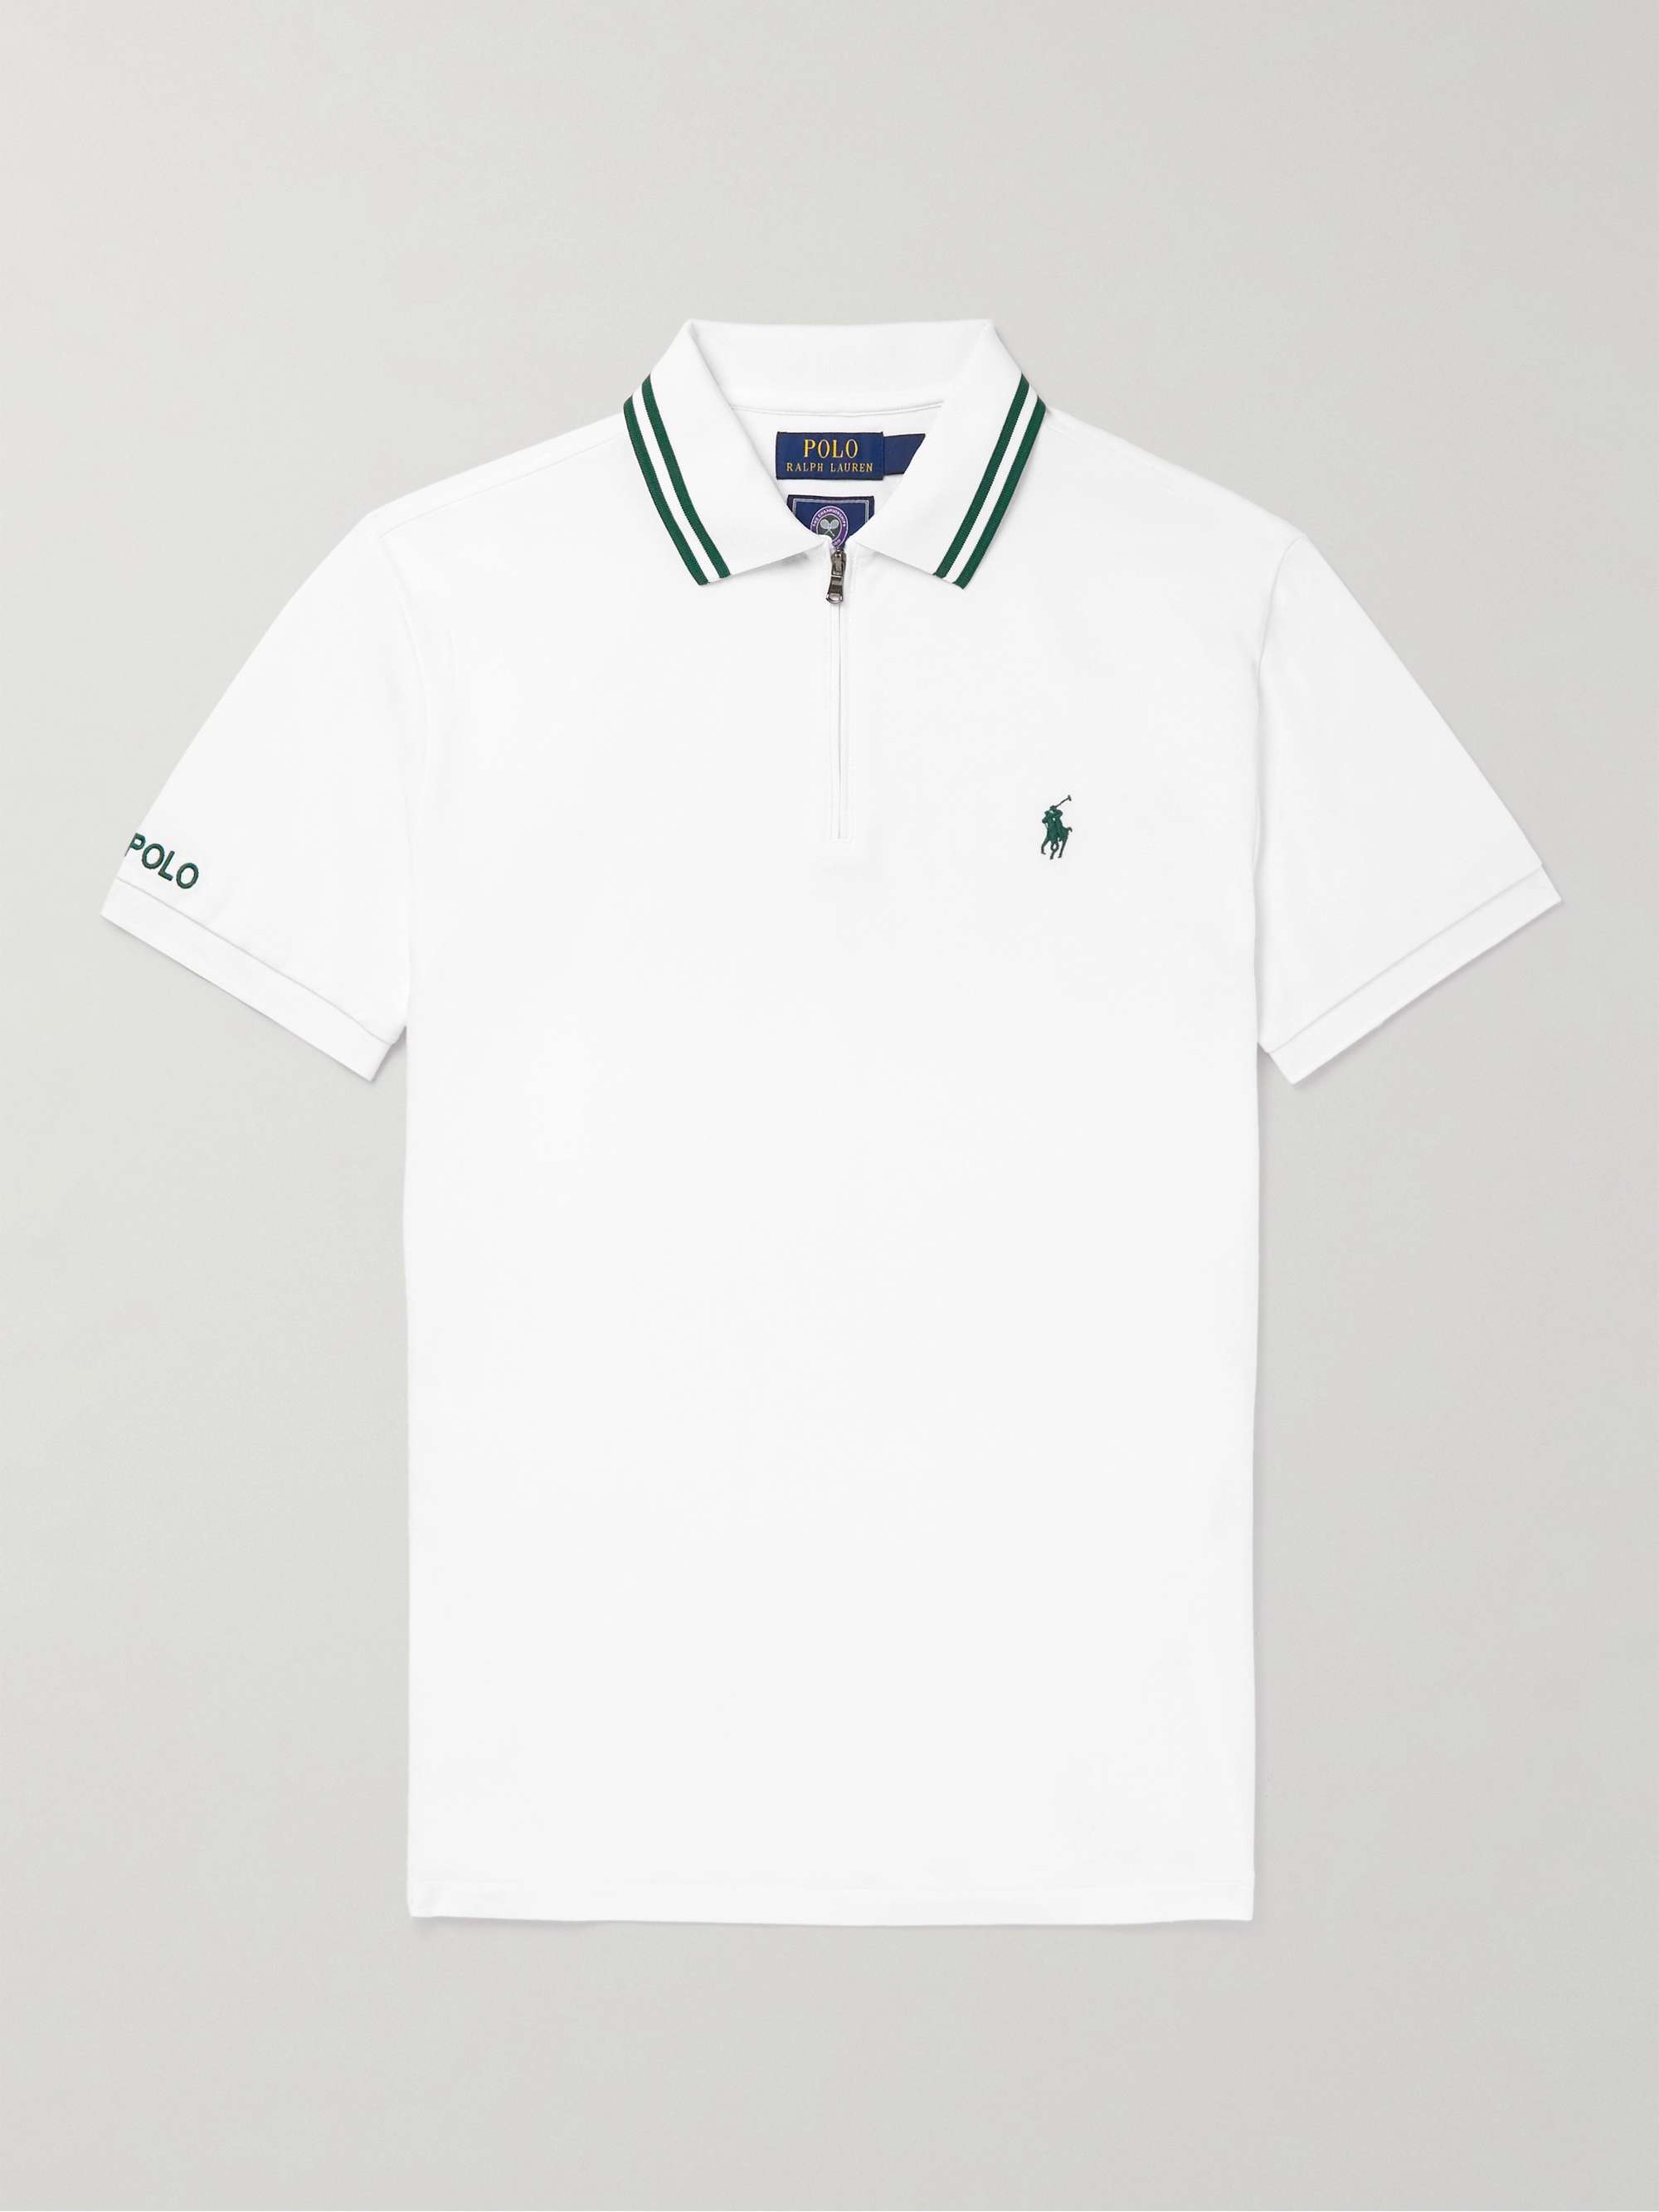 Embroidered Cotton Pique Polo - Ready-to-Wear